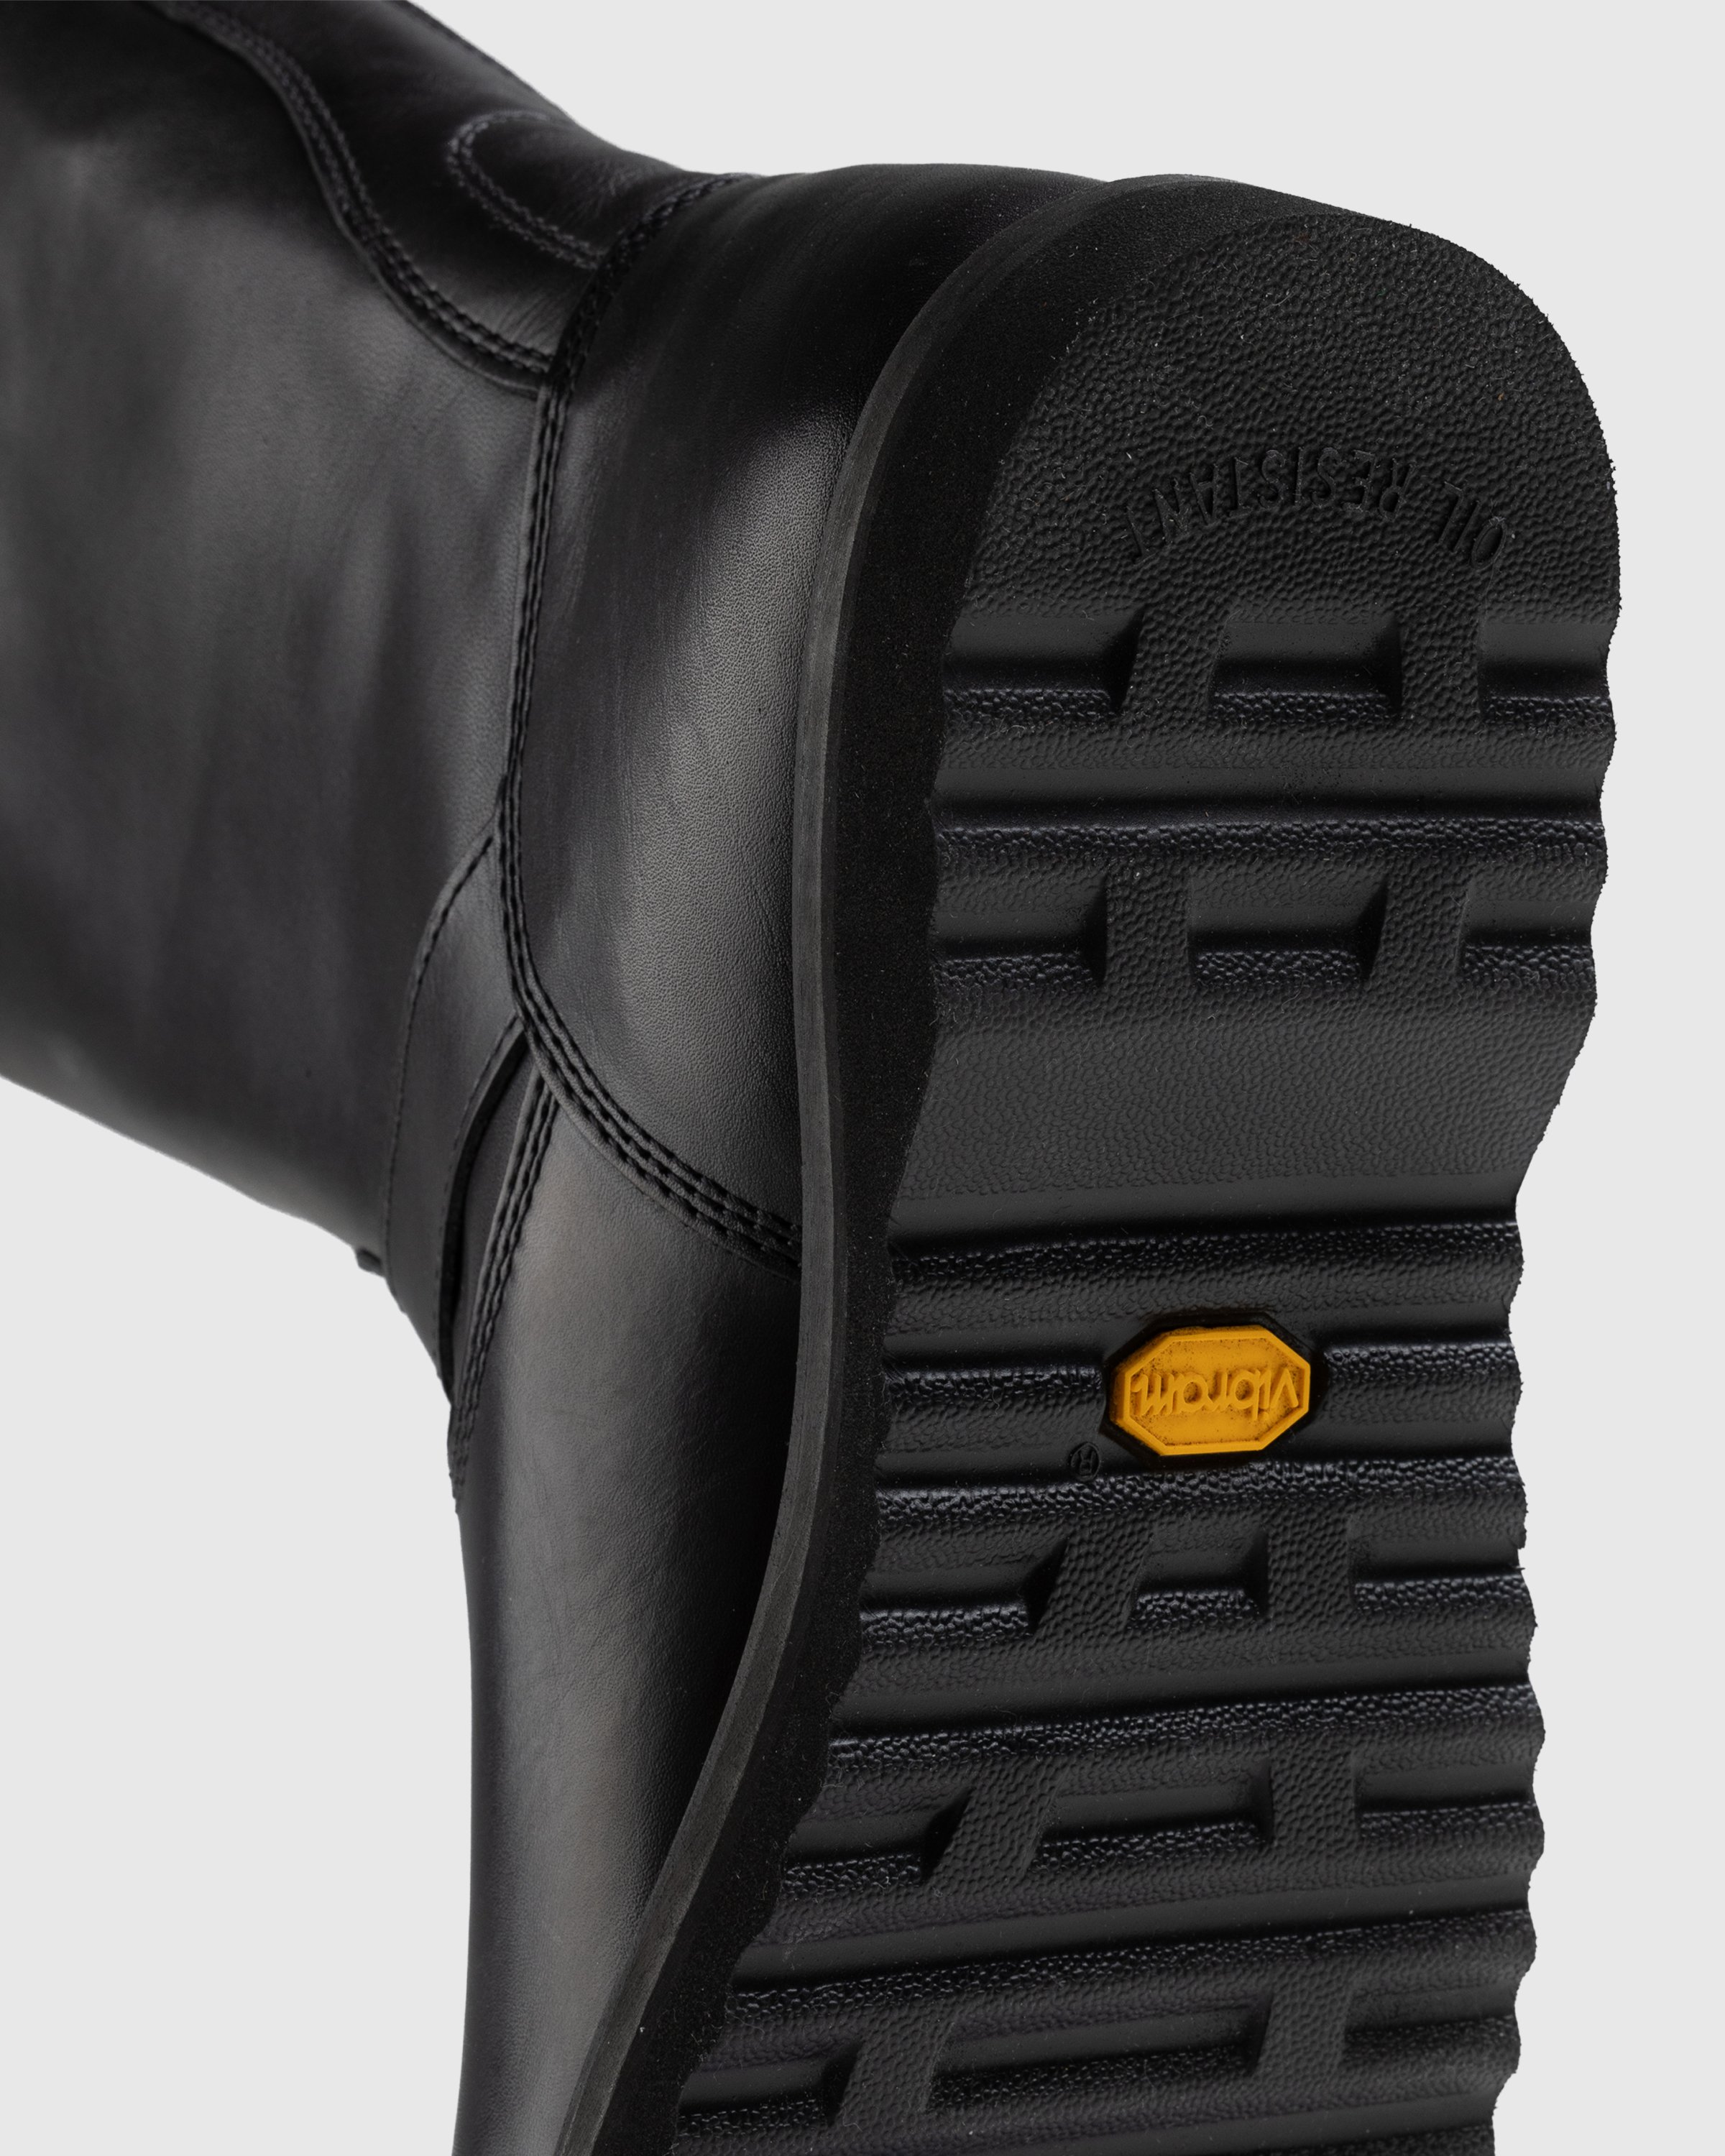 Our Legacy - Corral Boot Black - Footwear - Black - Image 6